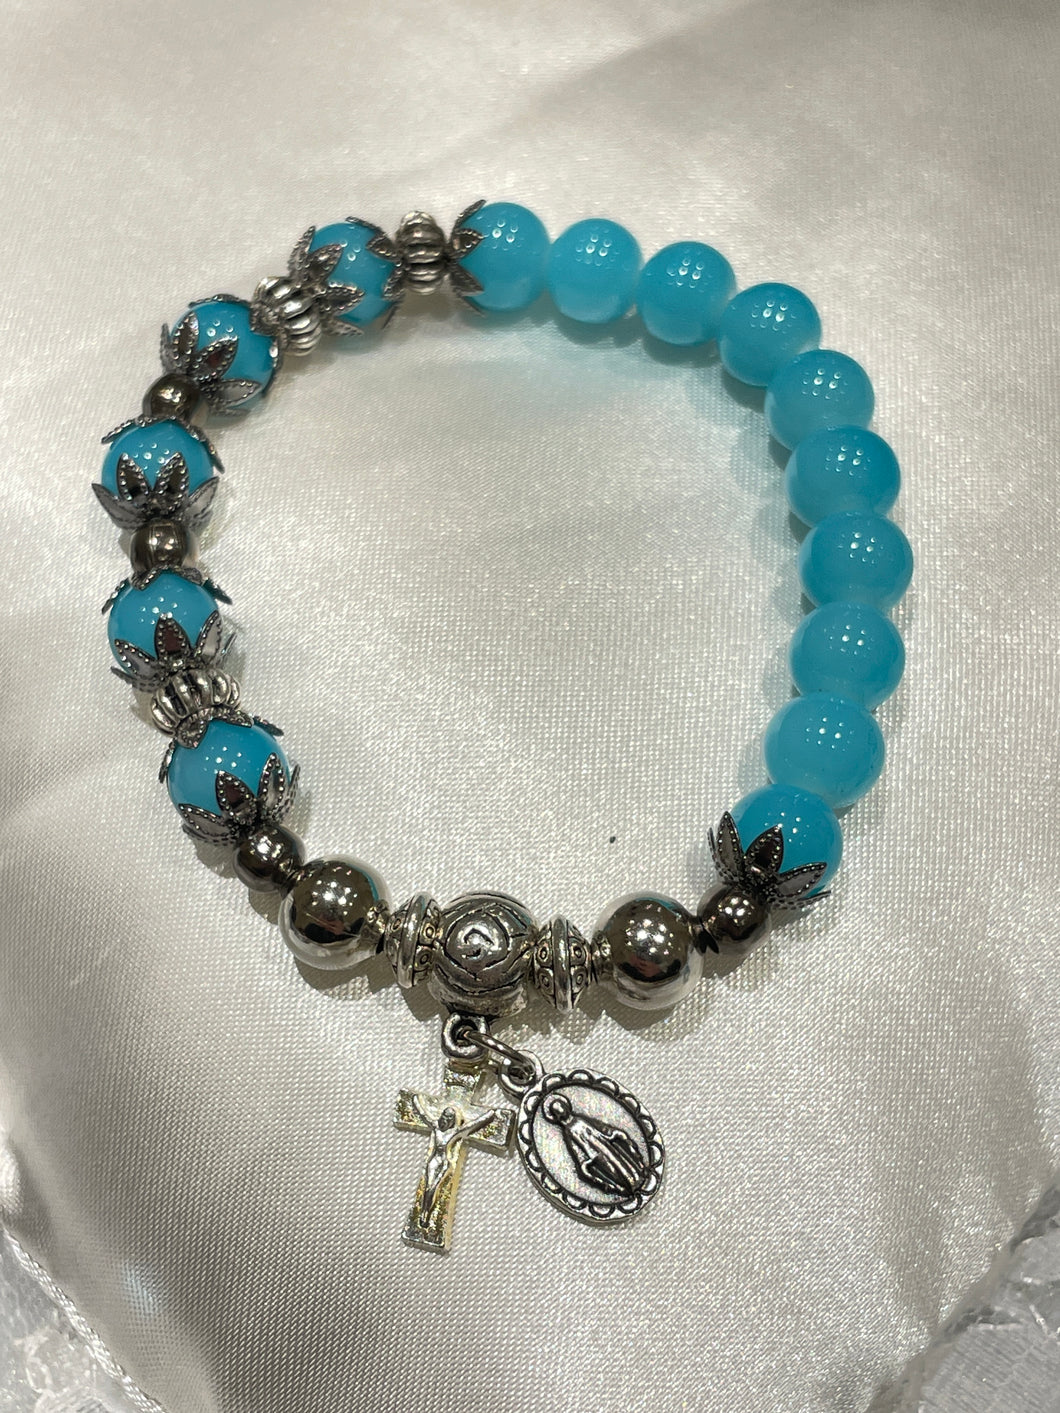 Blue Gemstone Rosary Bracelet with Miraculous Medal and Crucifix Charms